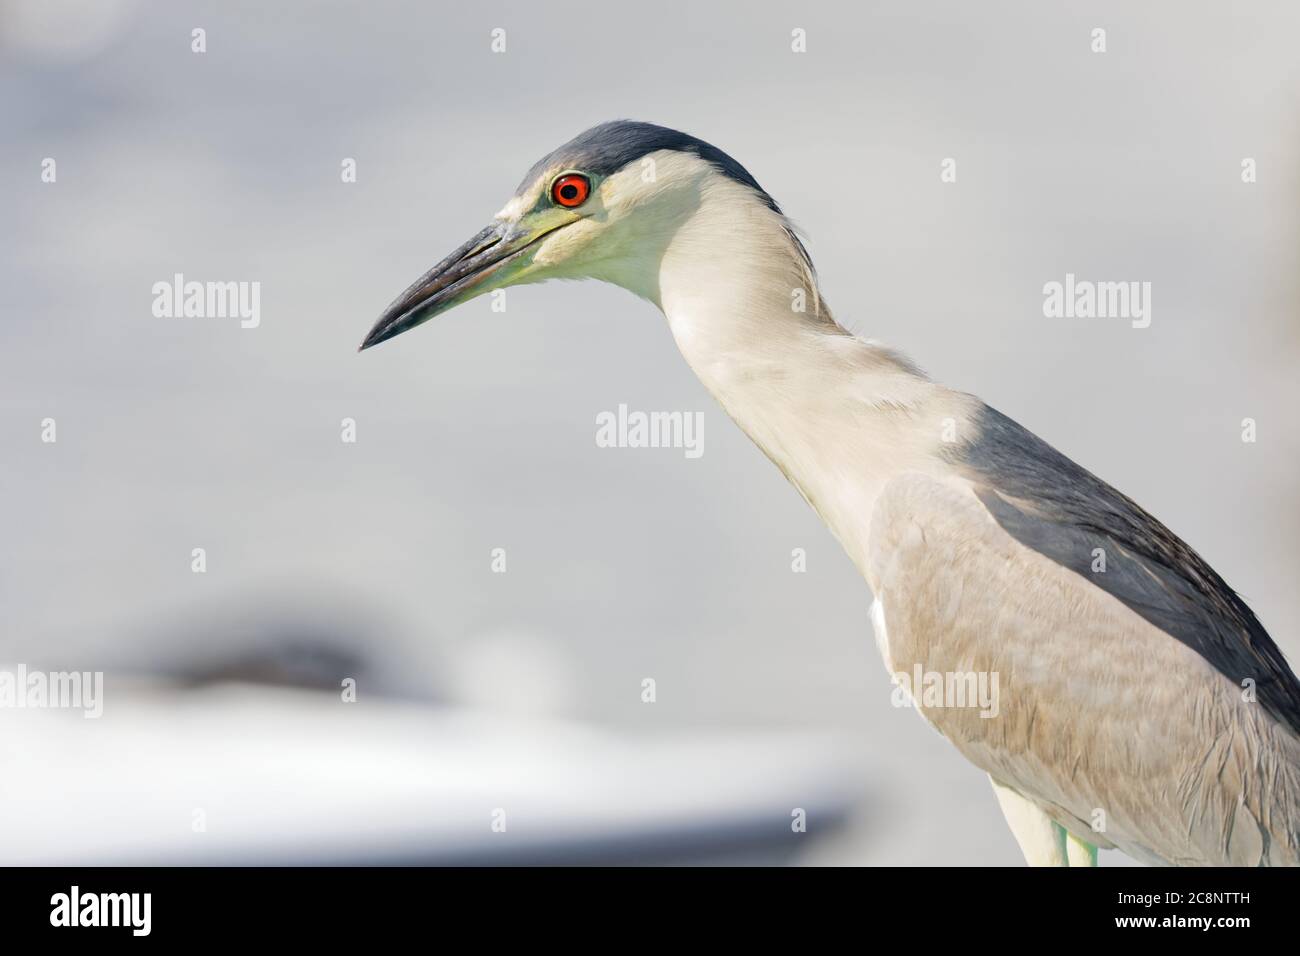 Close-up portrait of a beautiful adult Black-crowned Night Heron (Nycticorax nycticorax). Note the beautiful red eye. Stock Photo